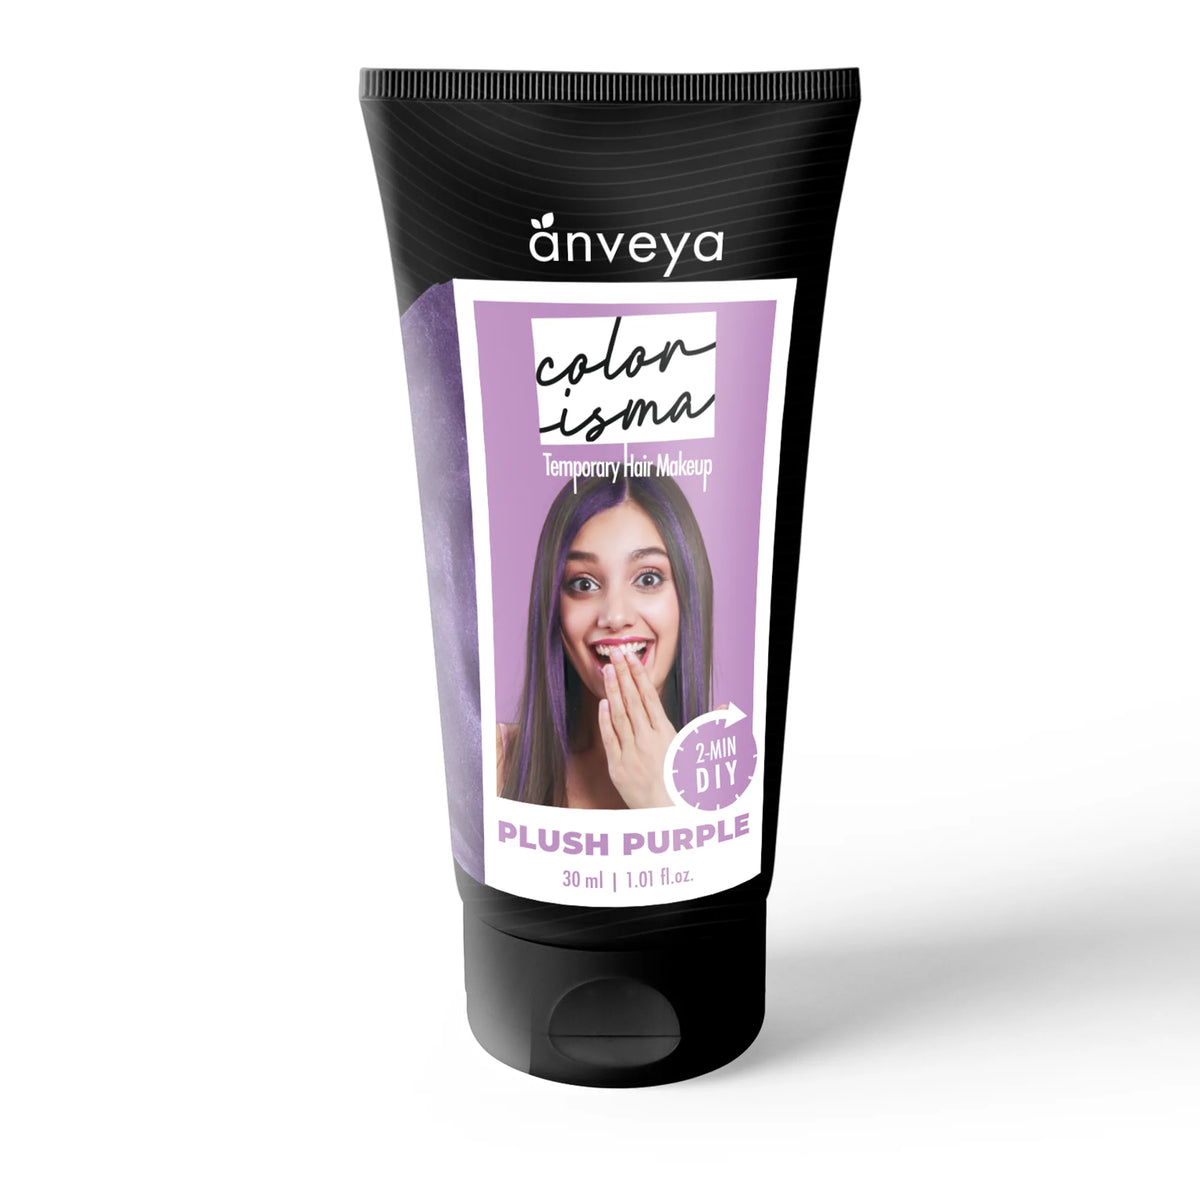 Anveya Colorisma Plush Purple One Day One Wash Temporary Hair Color, 30ml